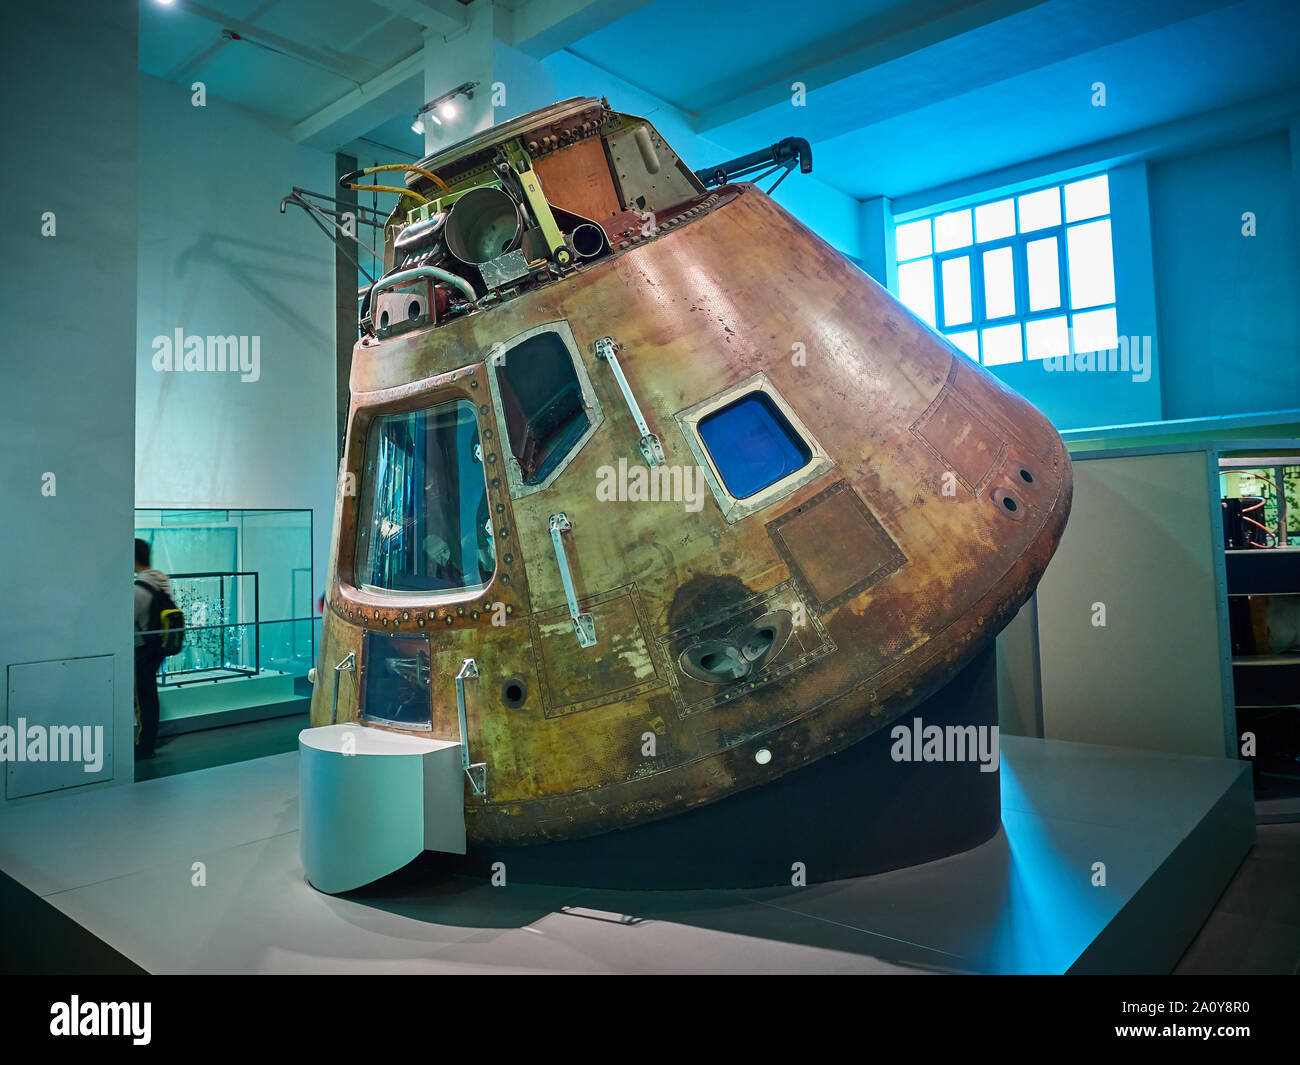 The Apollo 10 space capsule crewed by astronauts Thomas Stafford, John Young and Eugene Cernan on display at the British Science Museum in London Stock Photo